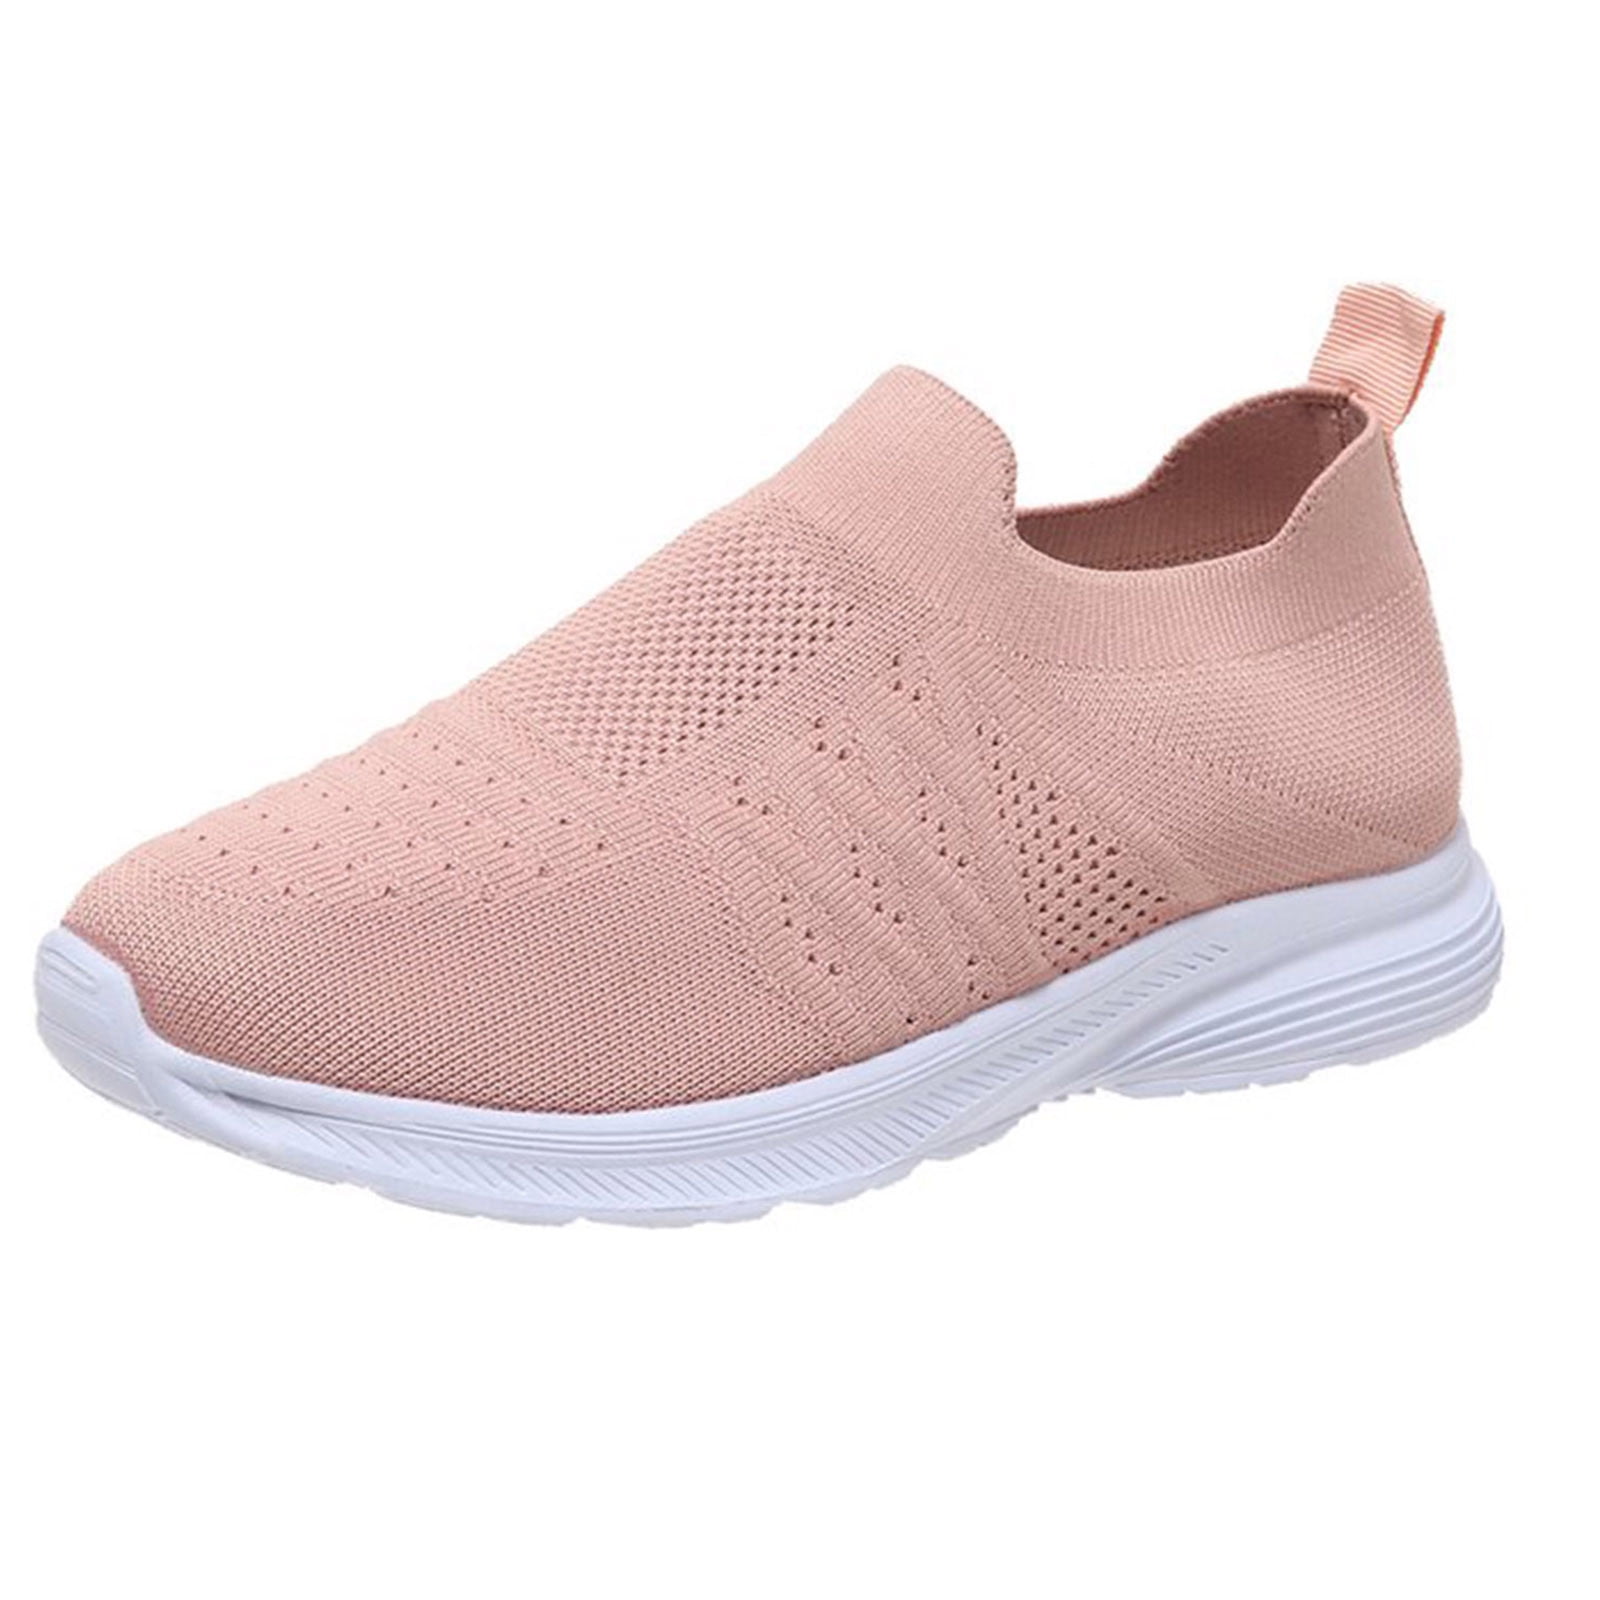 dmqupv Slip On Backless Sneakers Women Arch Support Sneakers for Women ...